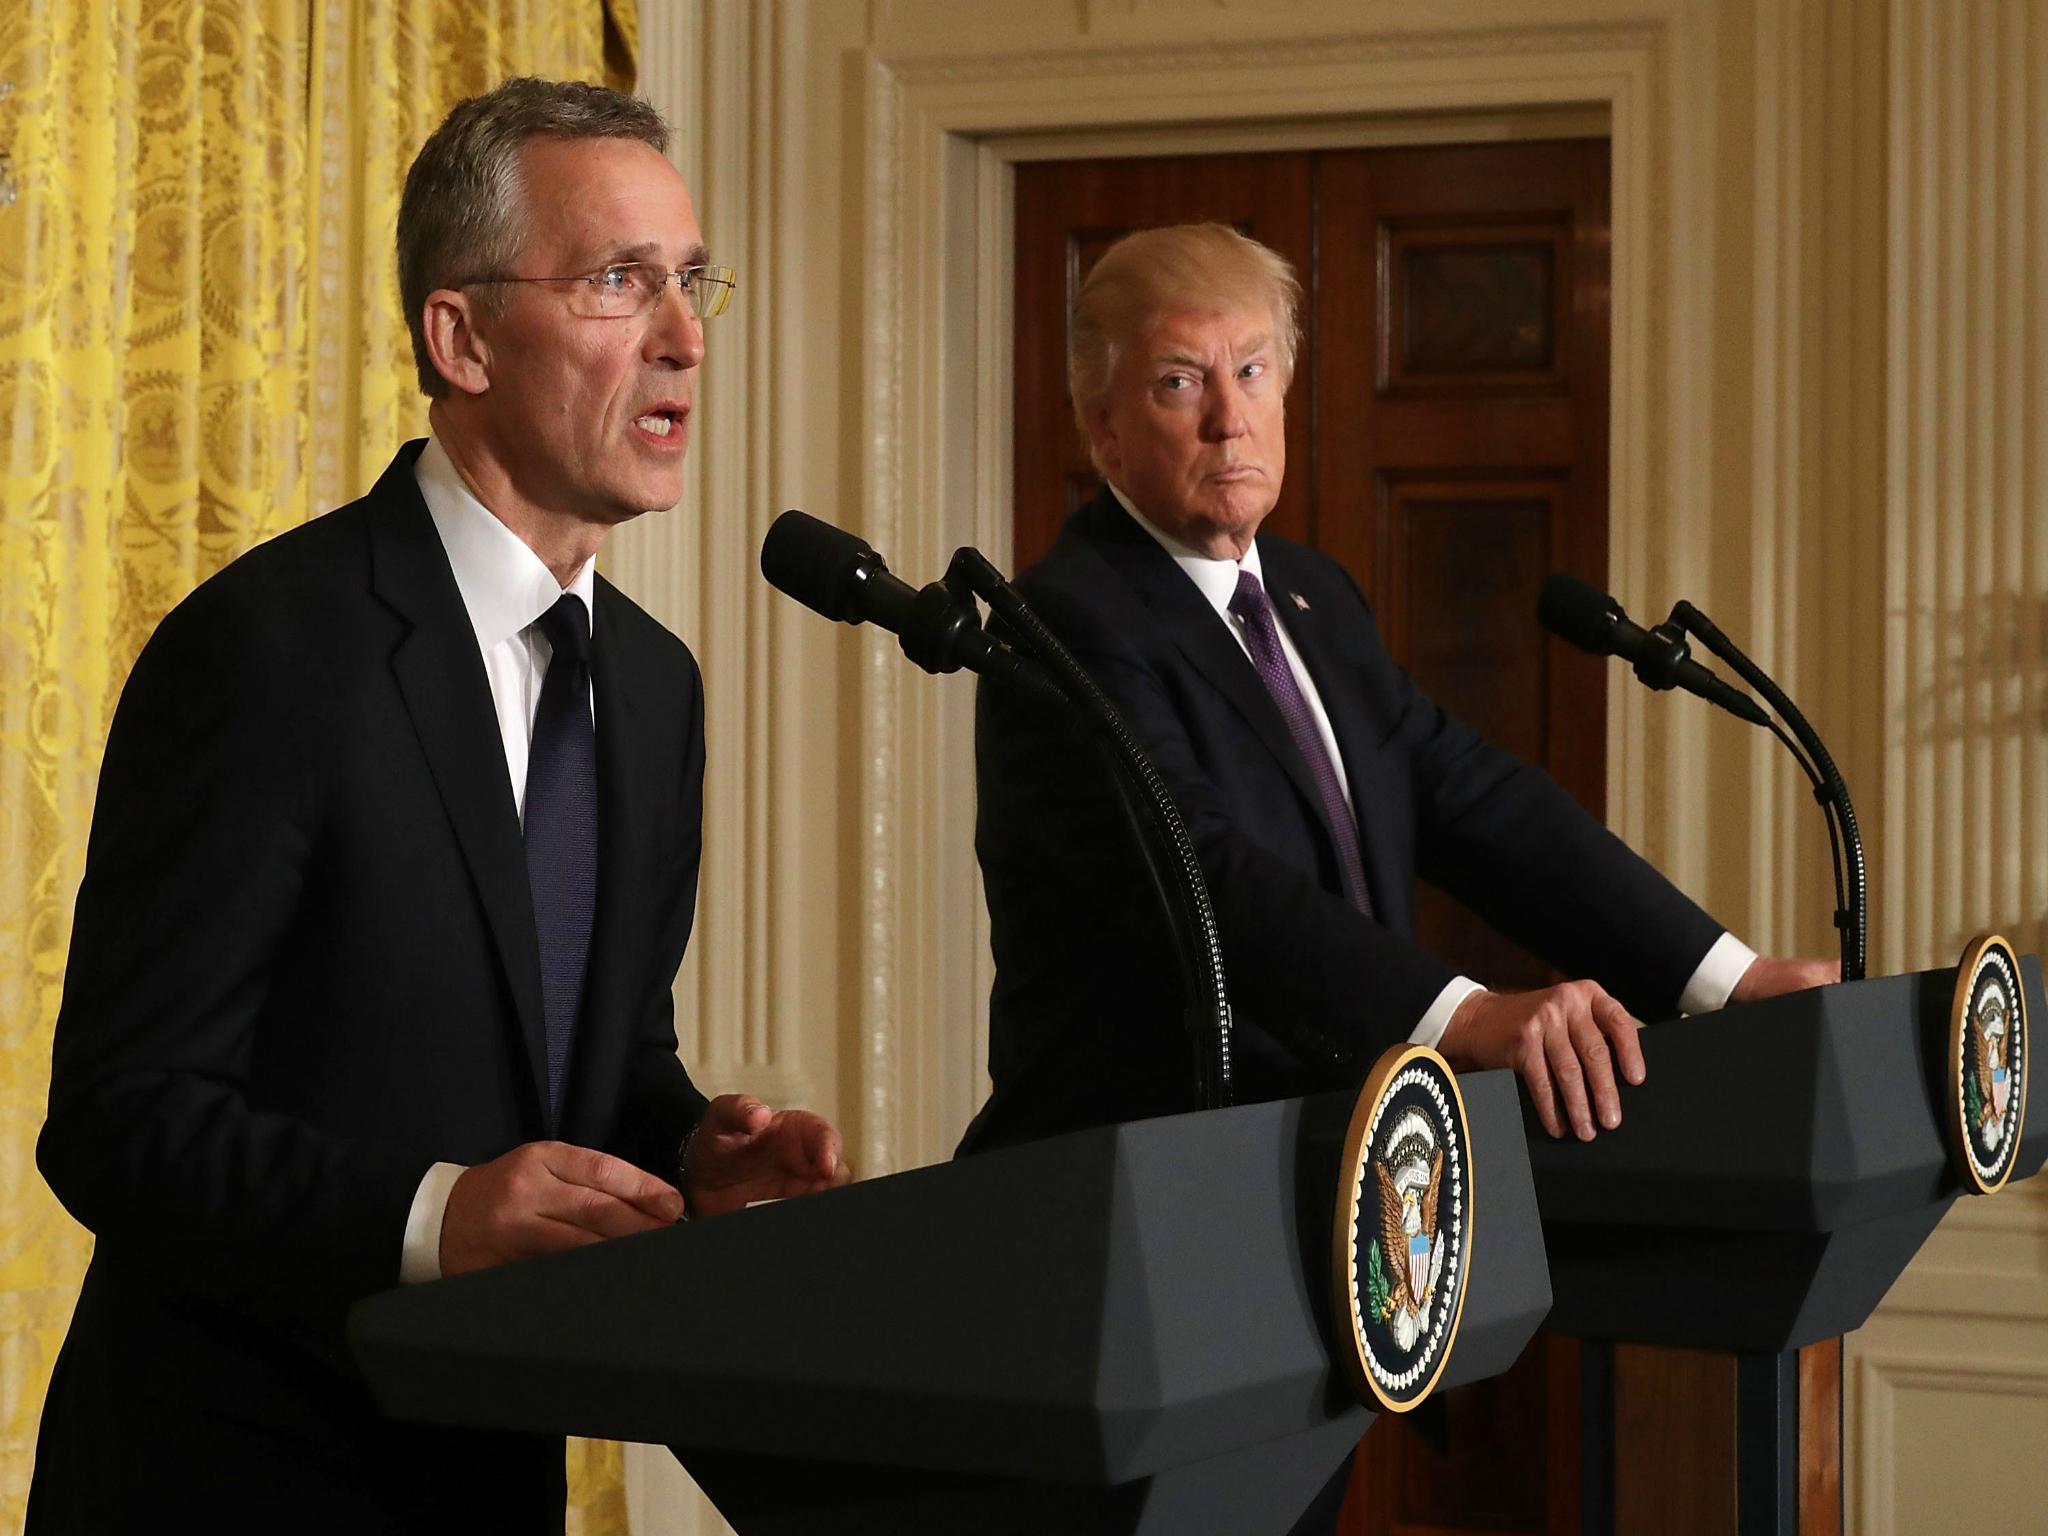 Nato Secretary General Jens Stoltenberg met with Donald Trump at the White House